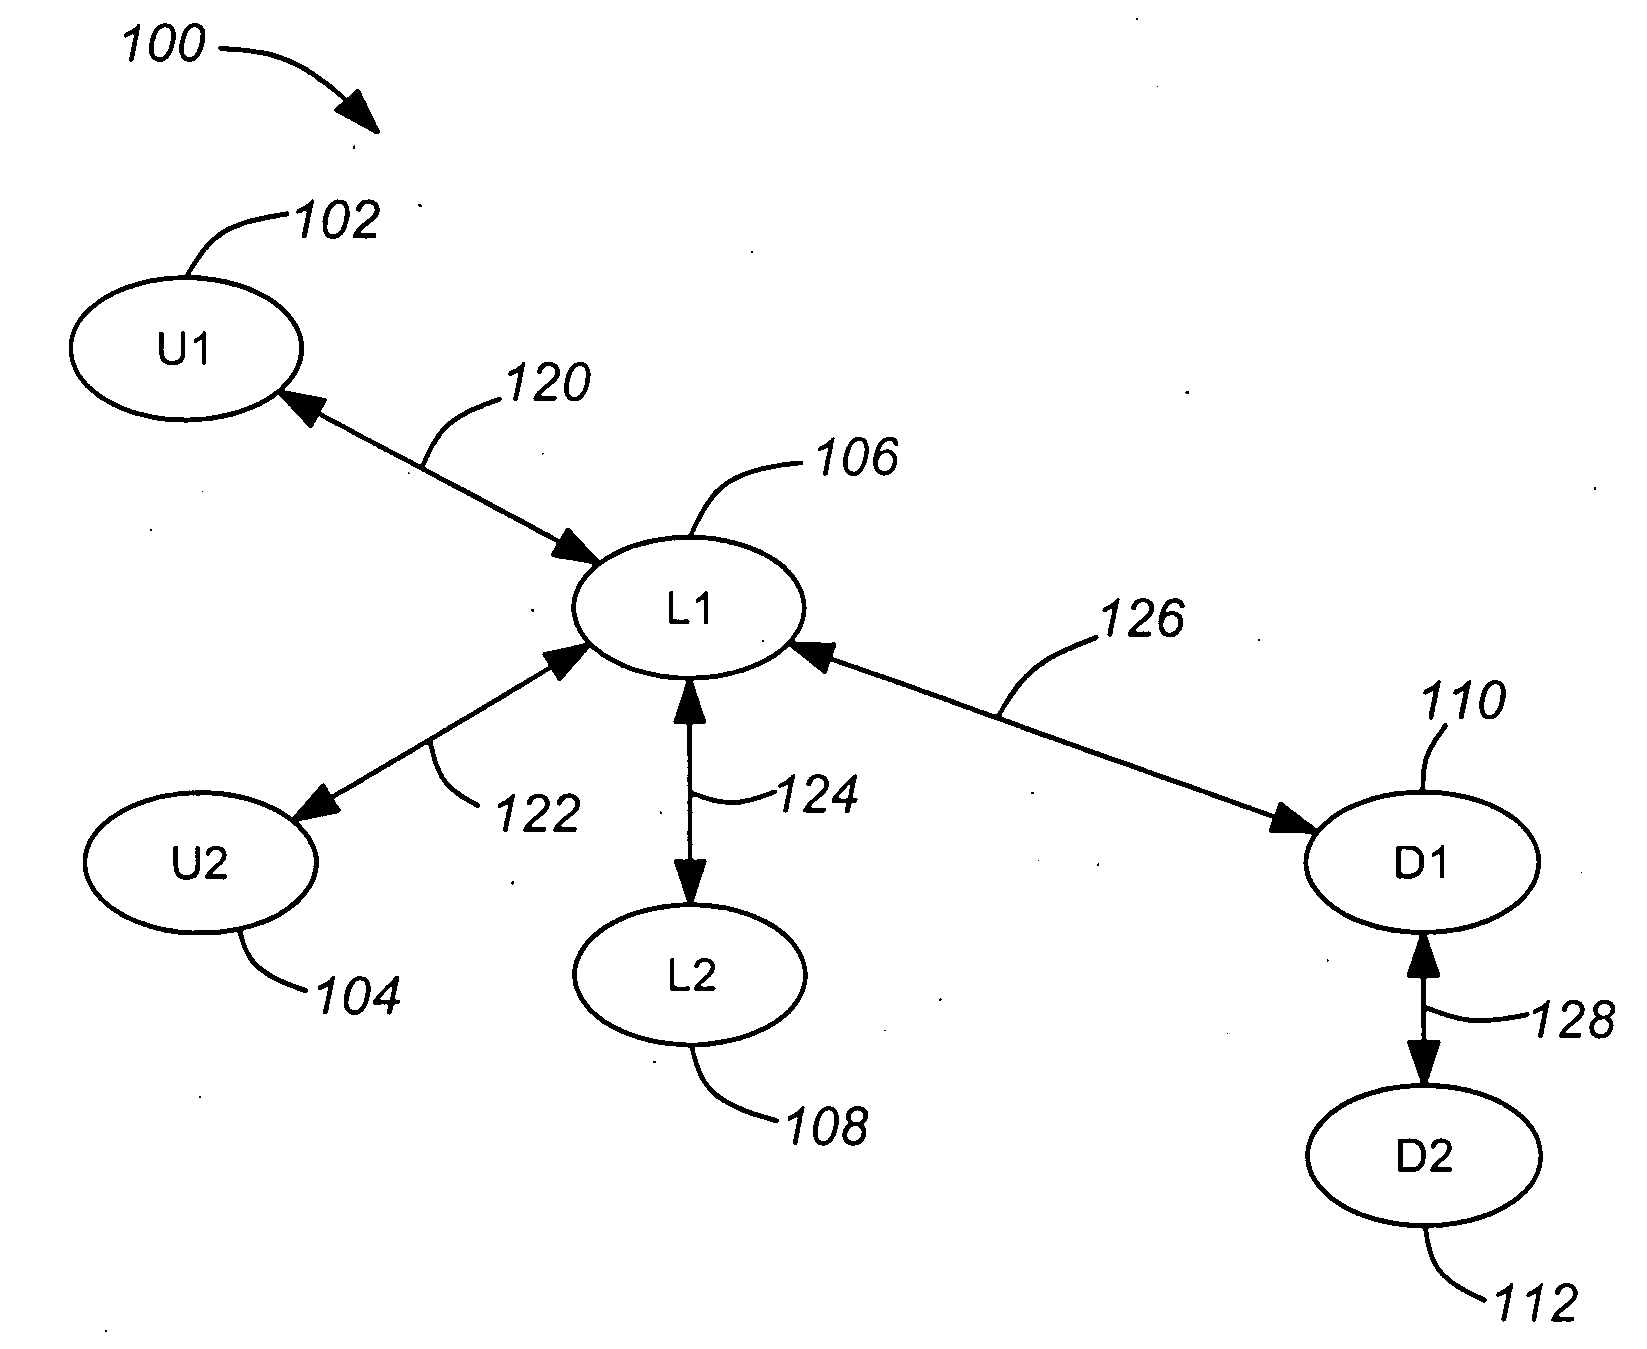 Predictive caching content distribution network